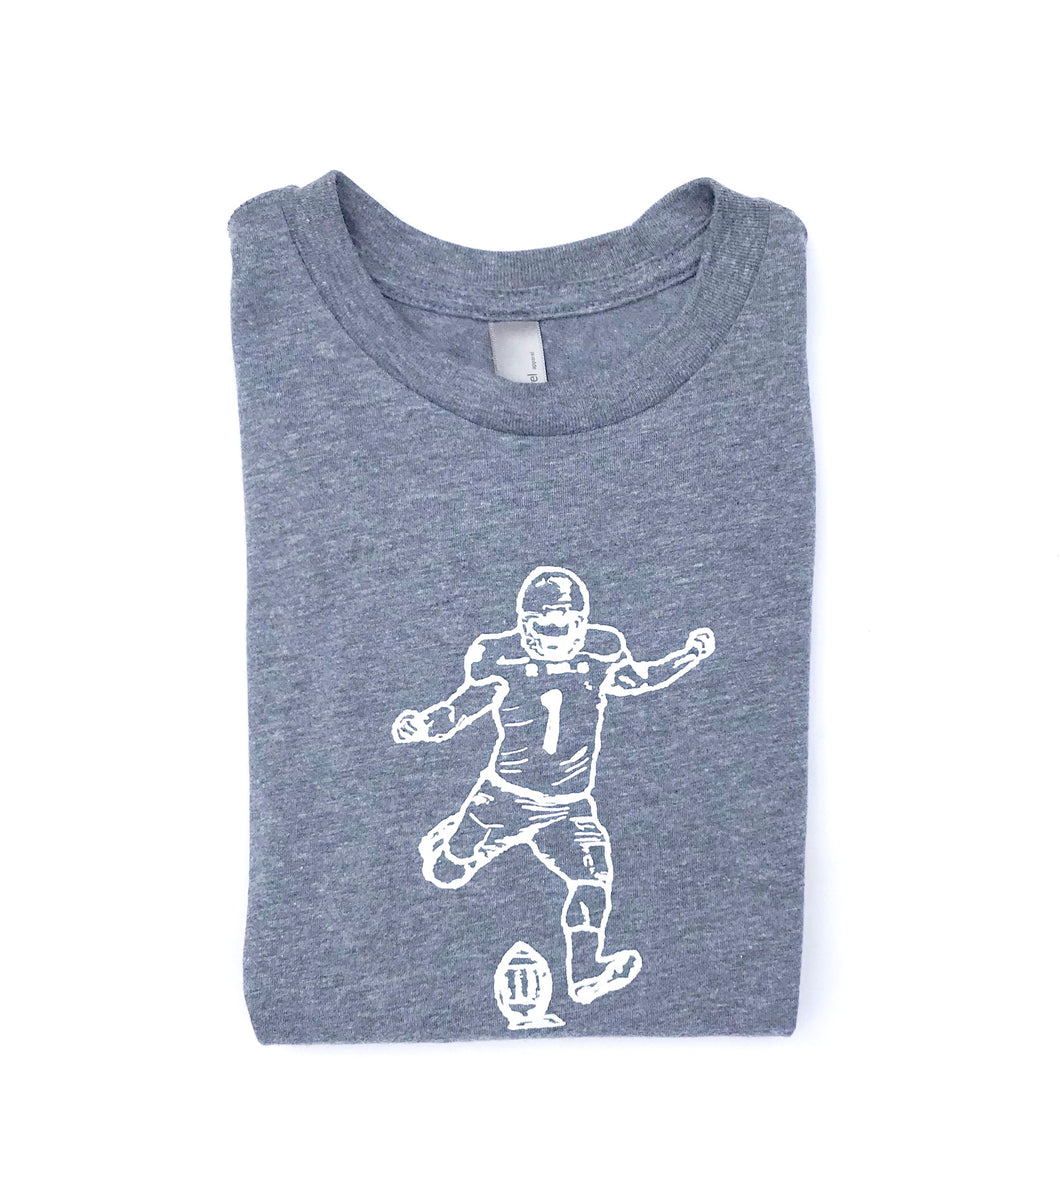 Kicker: Charcoal — bright and durable children's clothes, with love from Tennessee!